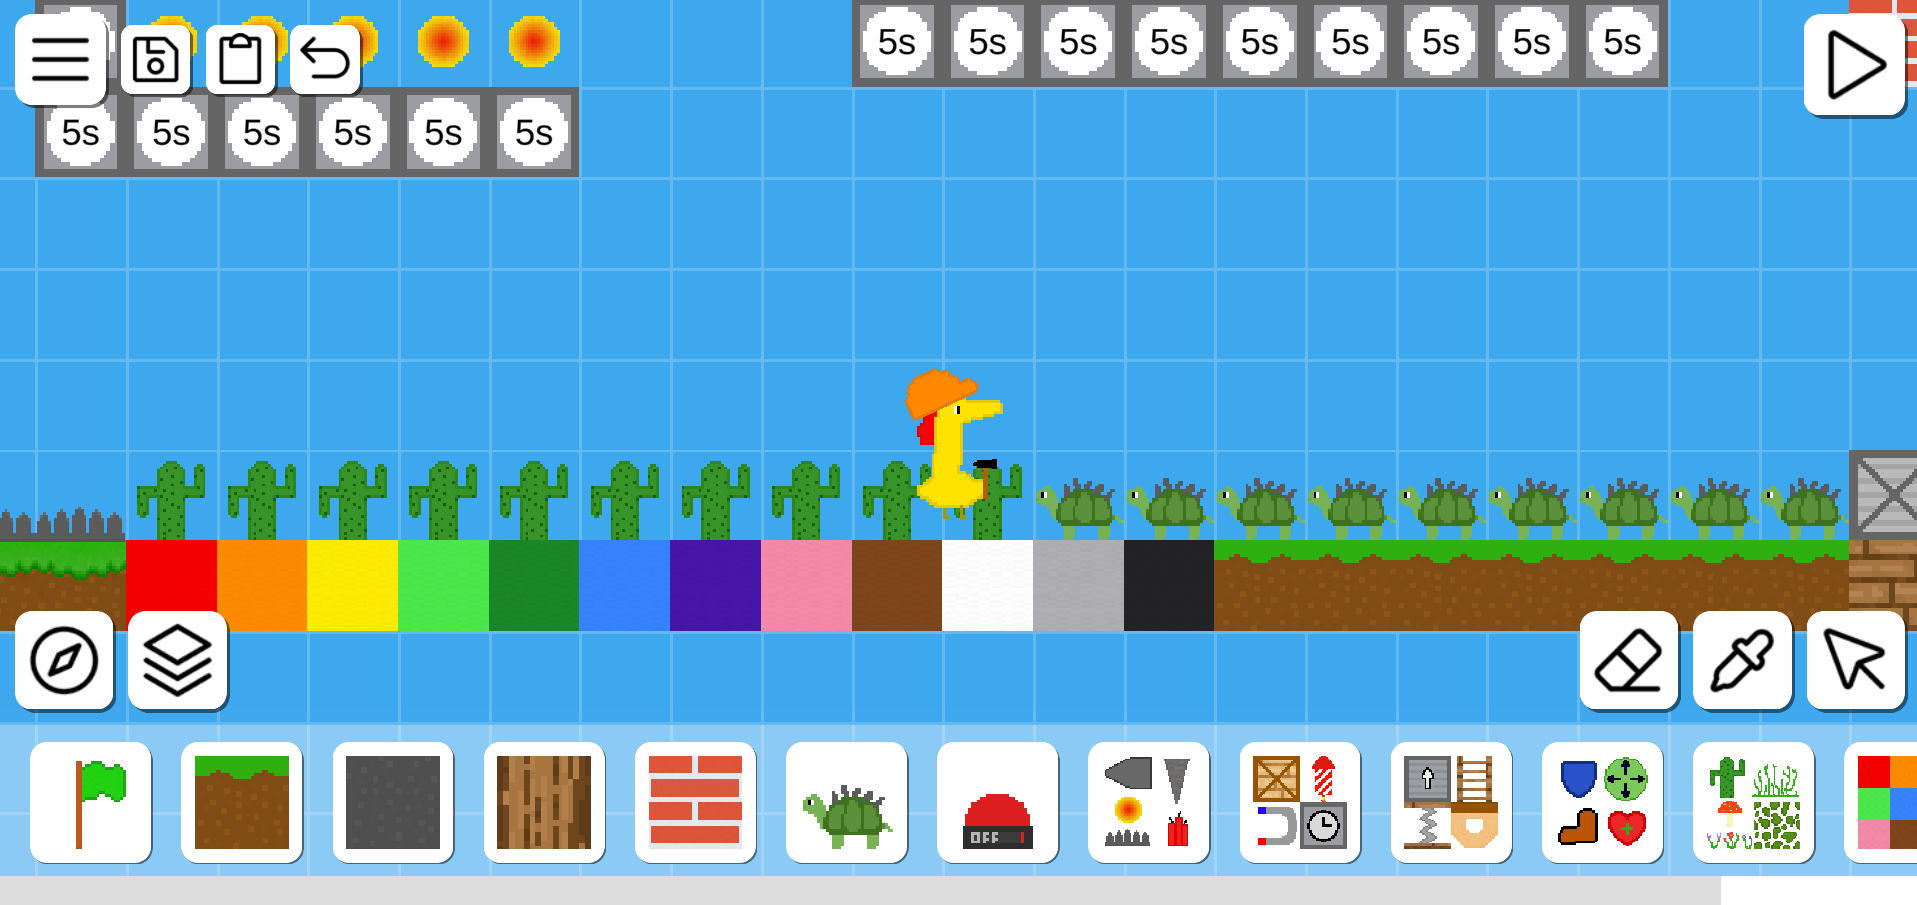 Editing a level with lots of cactus, turtles, and timers.